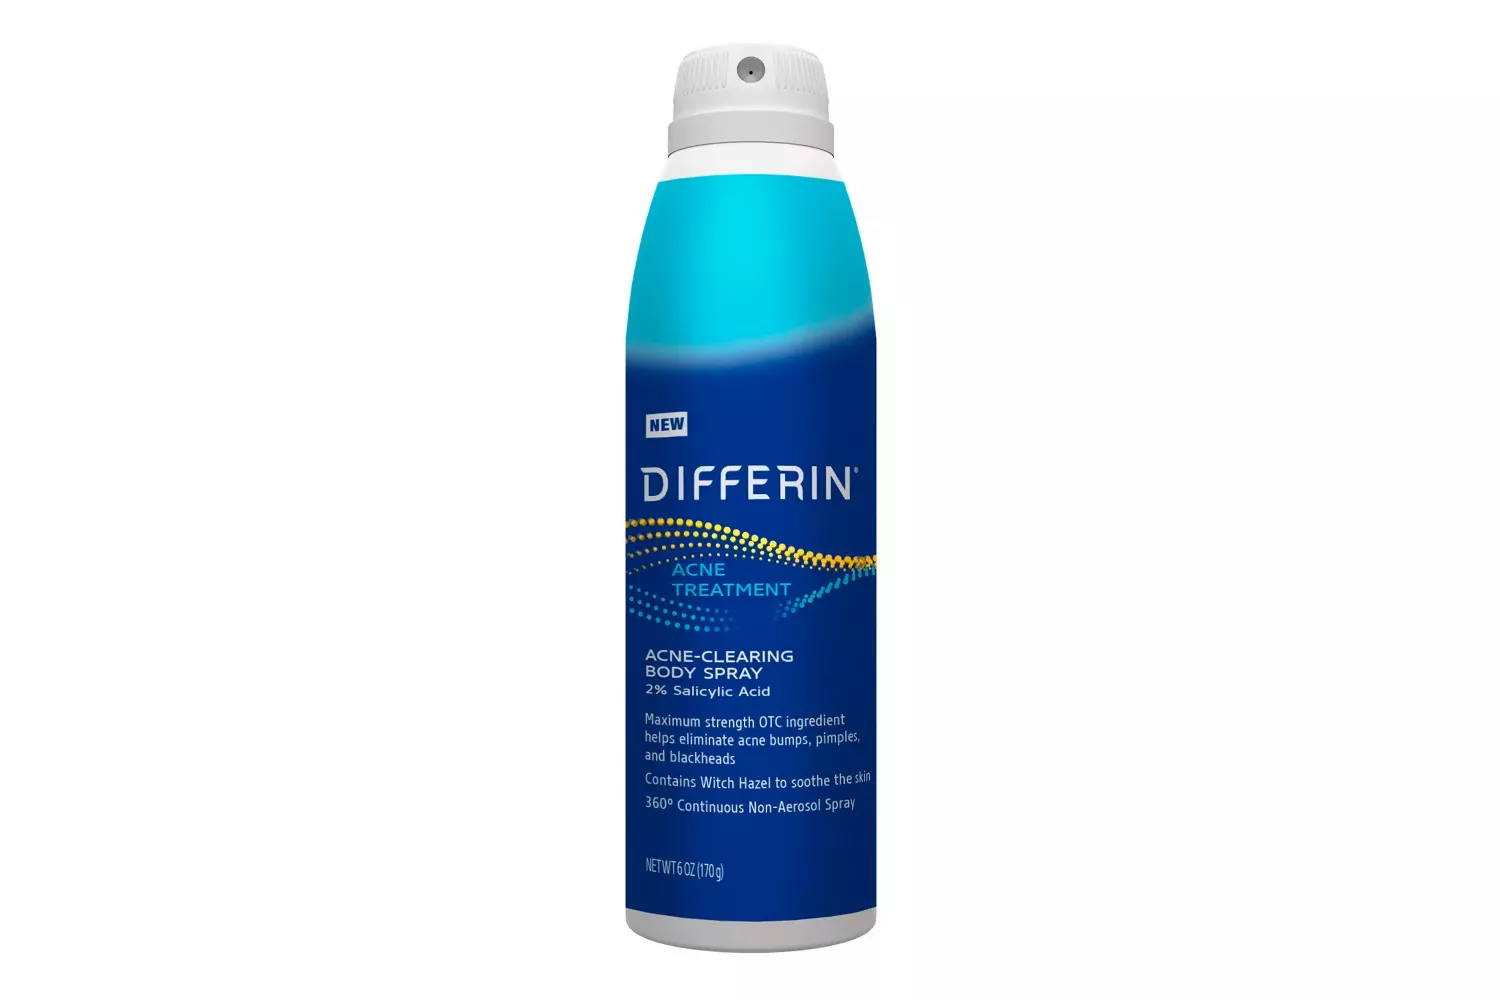 Differin Clearing Body Spray